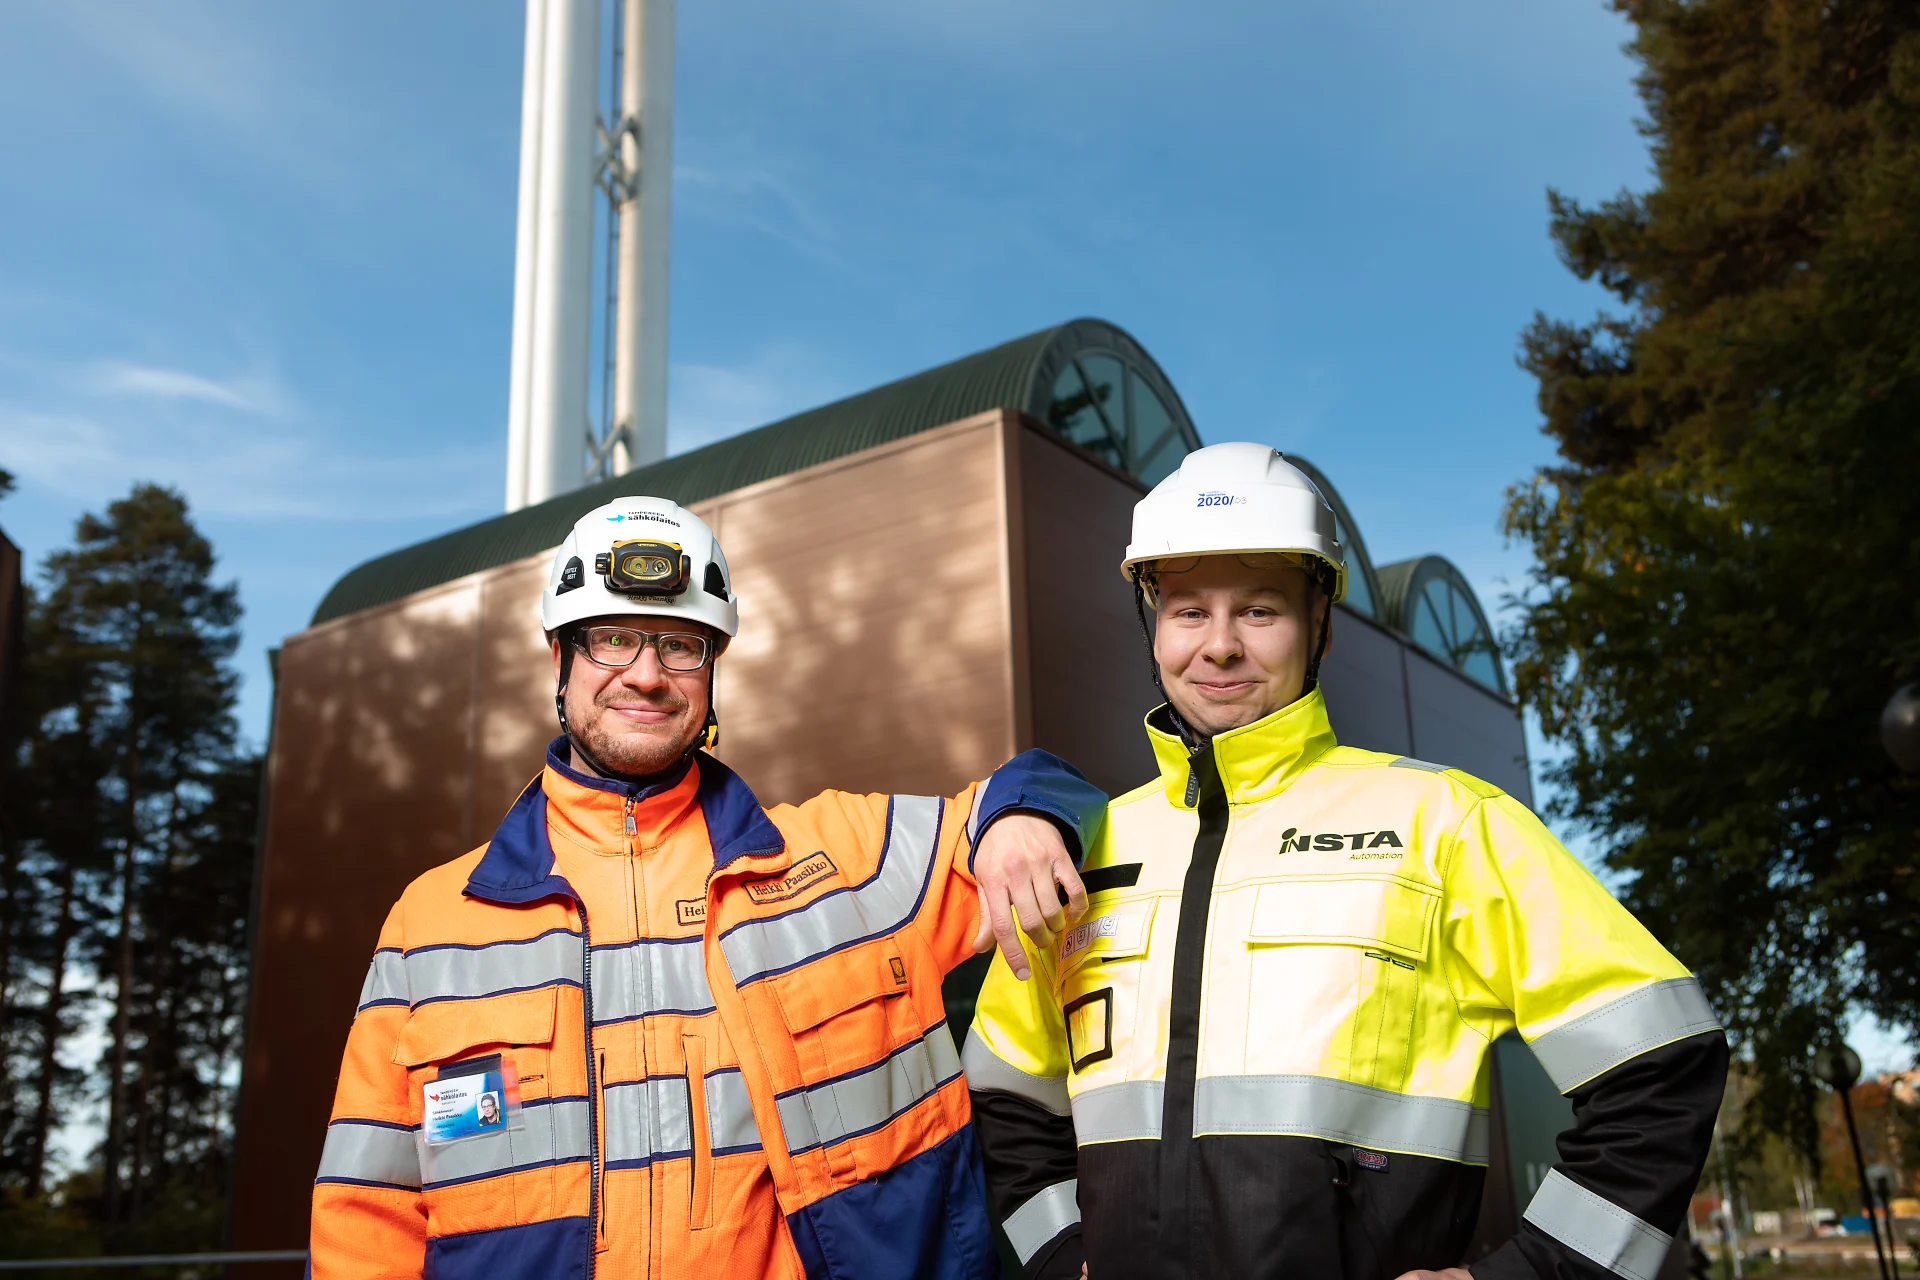 Employee of Insta and customer from Tampereen Energia in front of a heating plant.